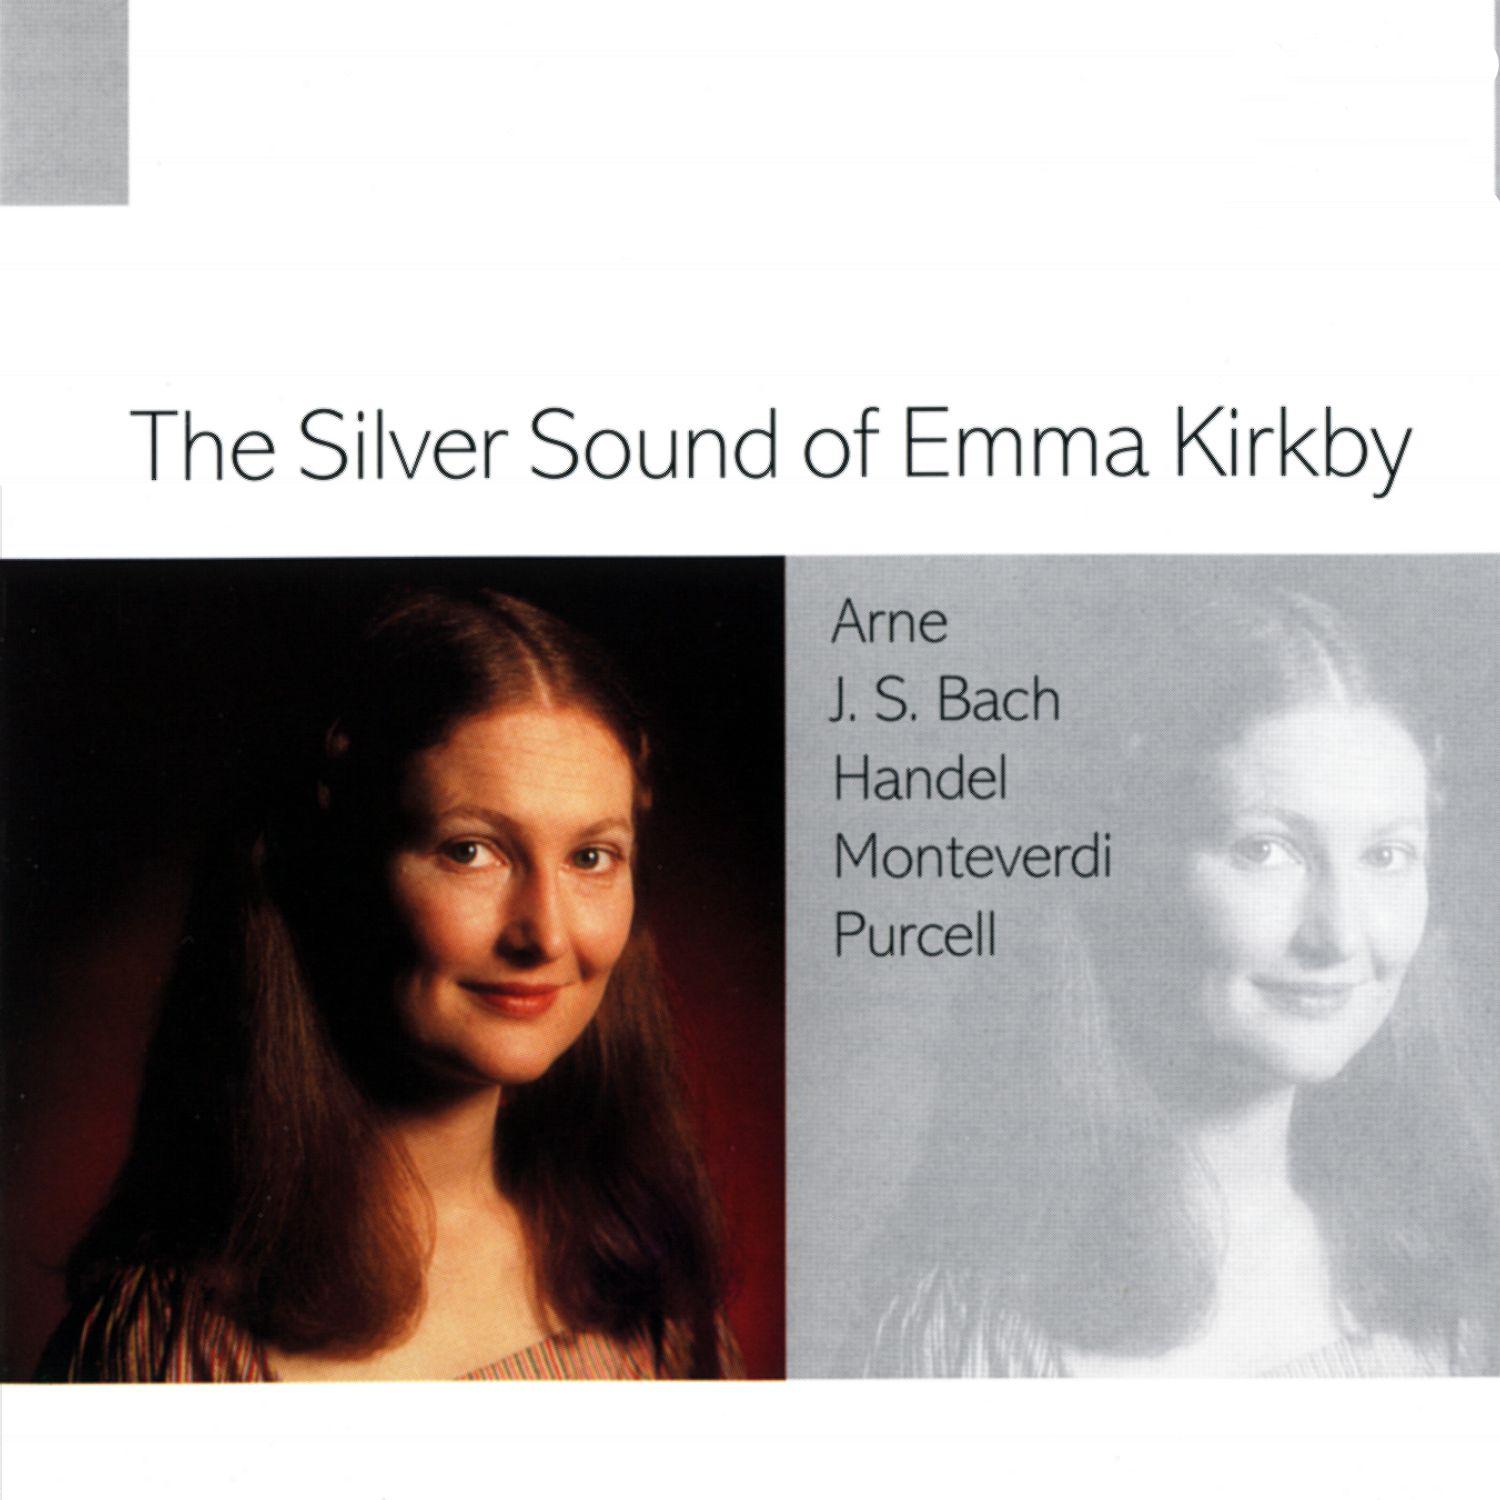 The Silver Sound of Emma Kirkby